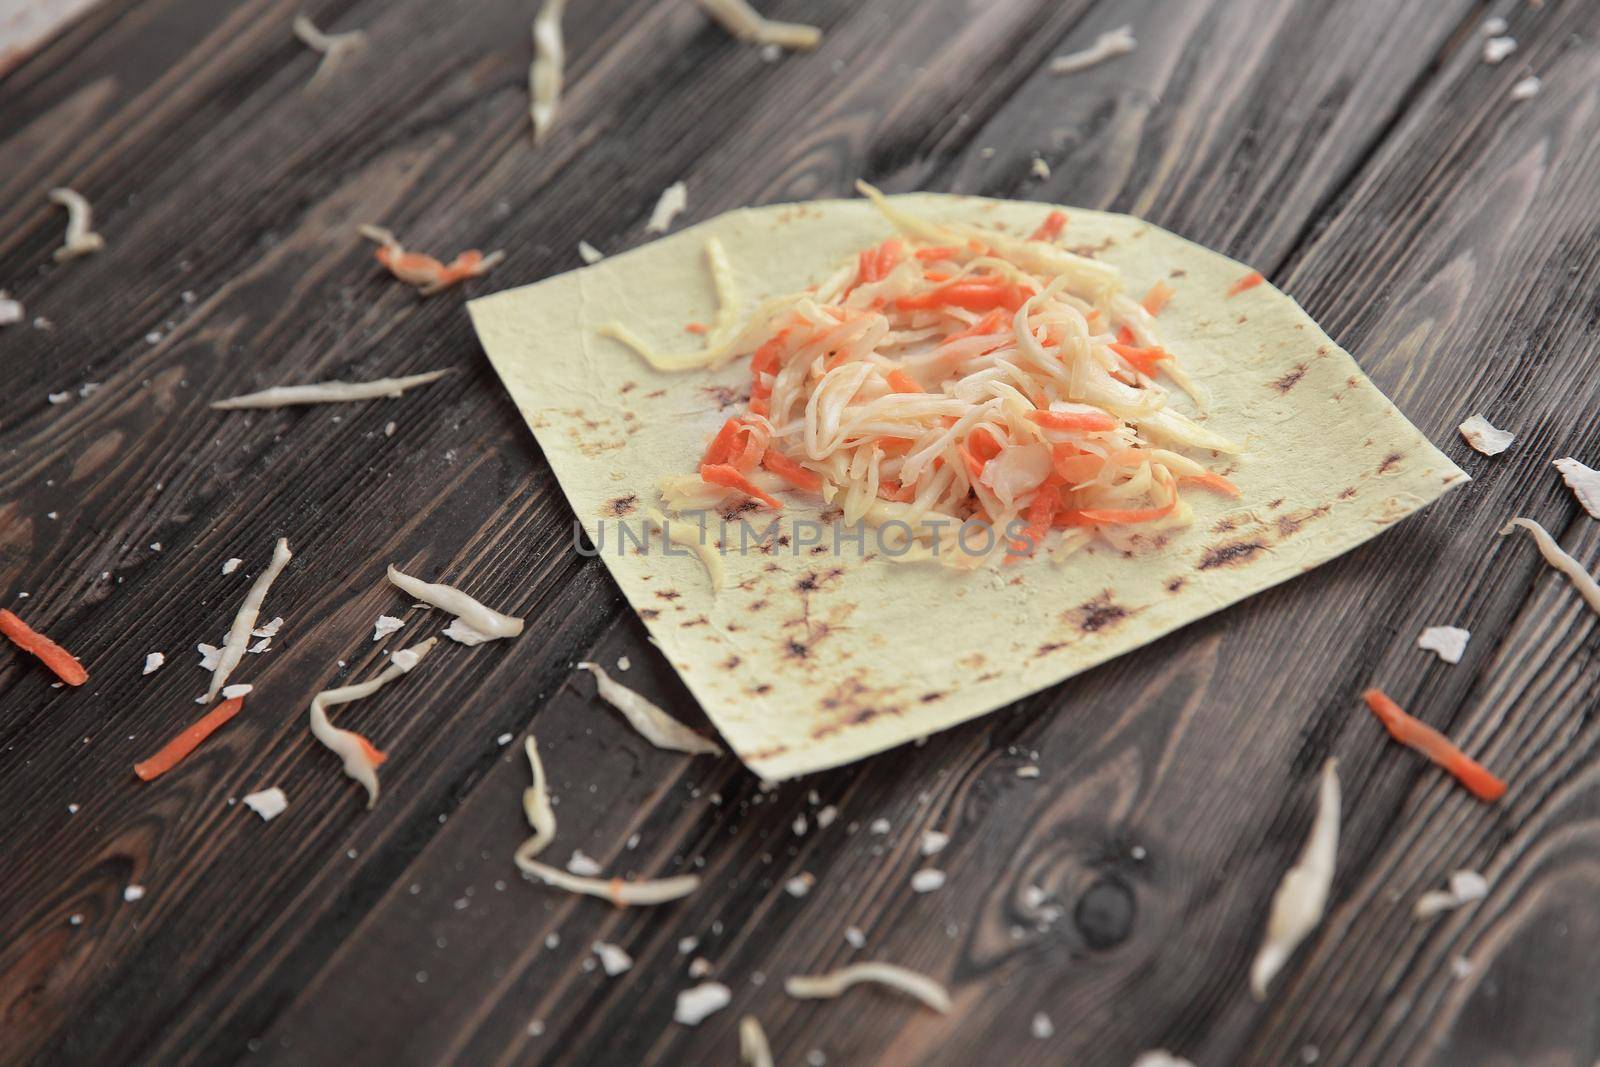 pickled cabbage on a pita.preparation of Shawarma. photo with co by SmartPhotoLab